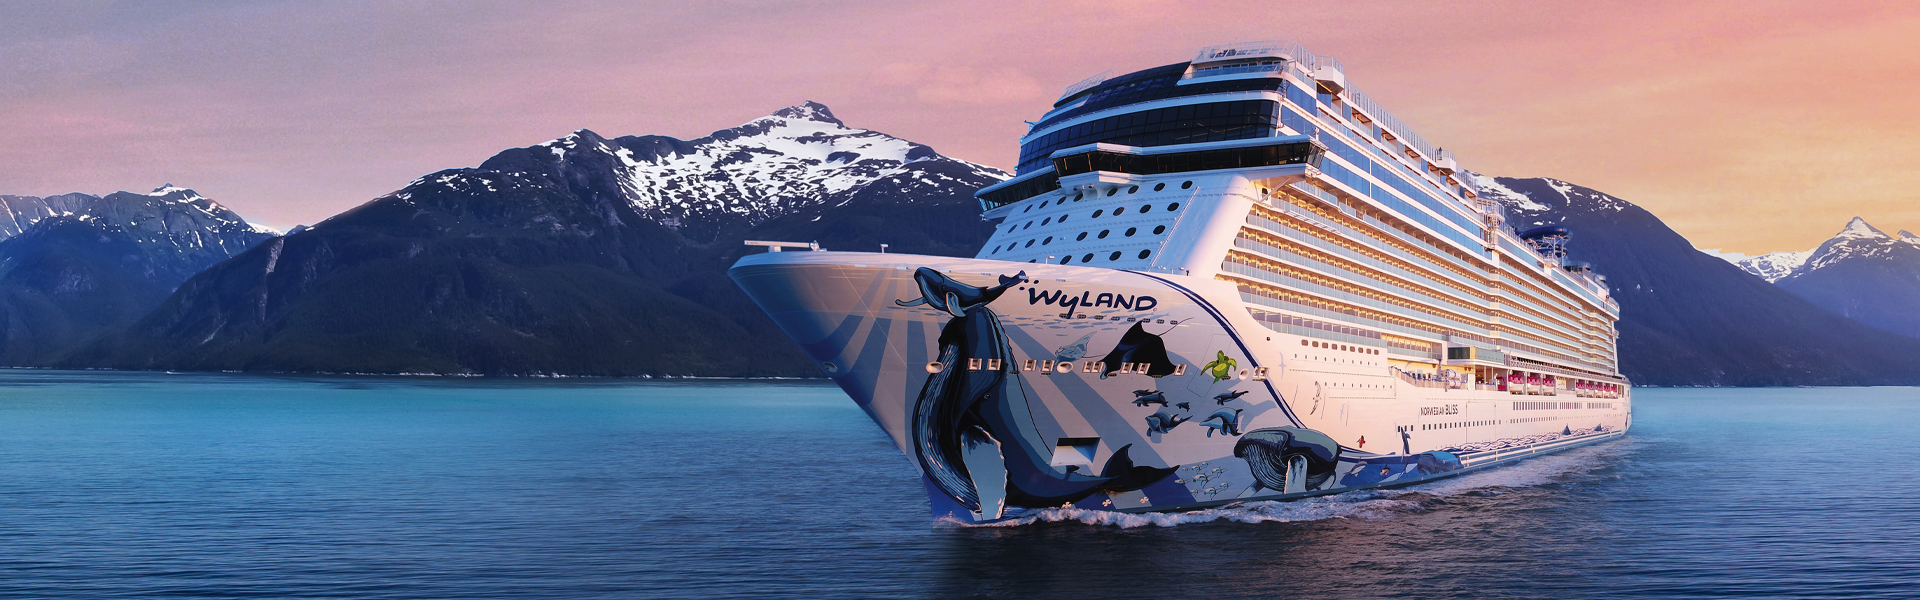 Looking for a special trip? Discover Alaska with Norwegian Bliss! 